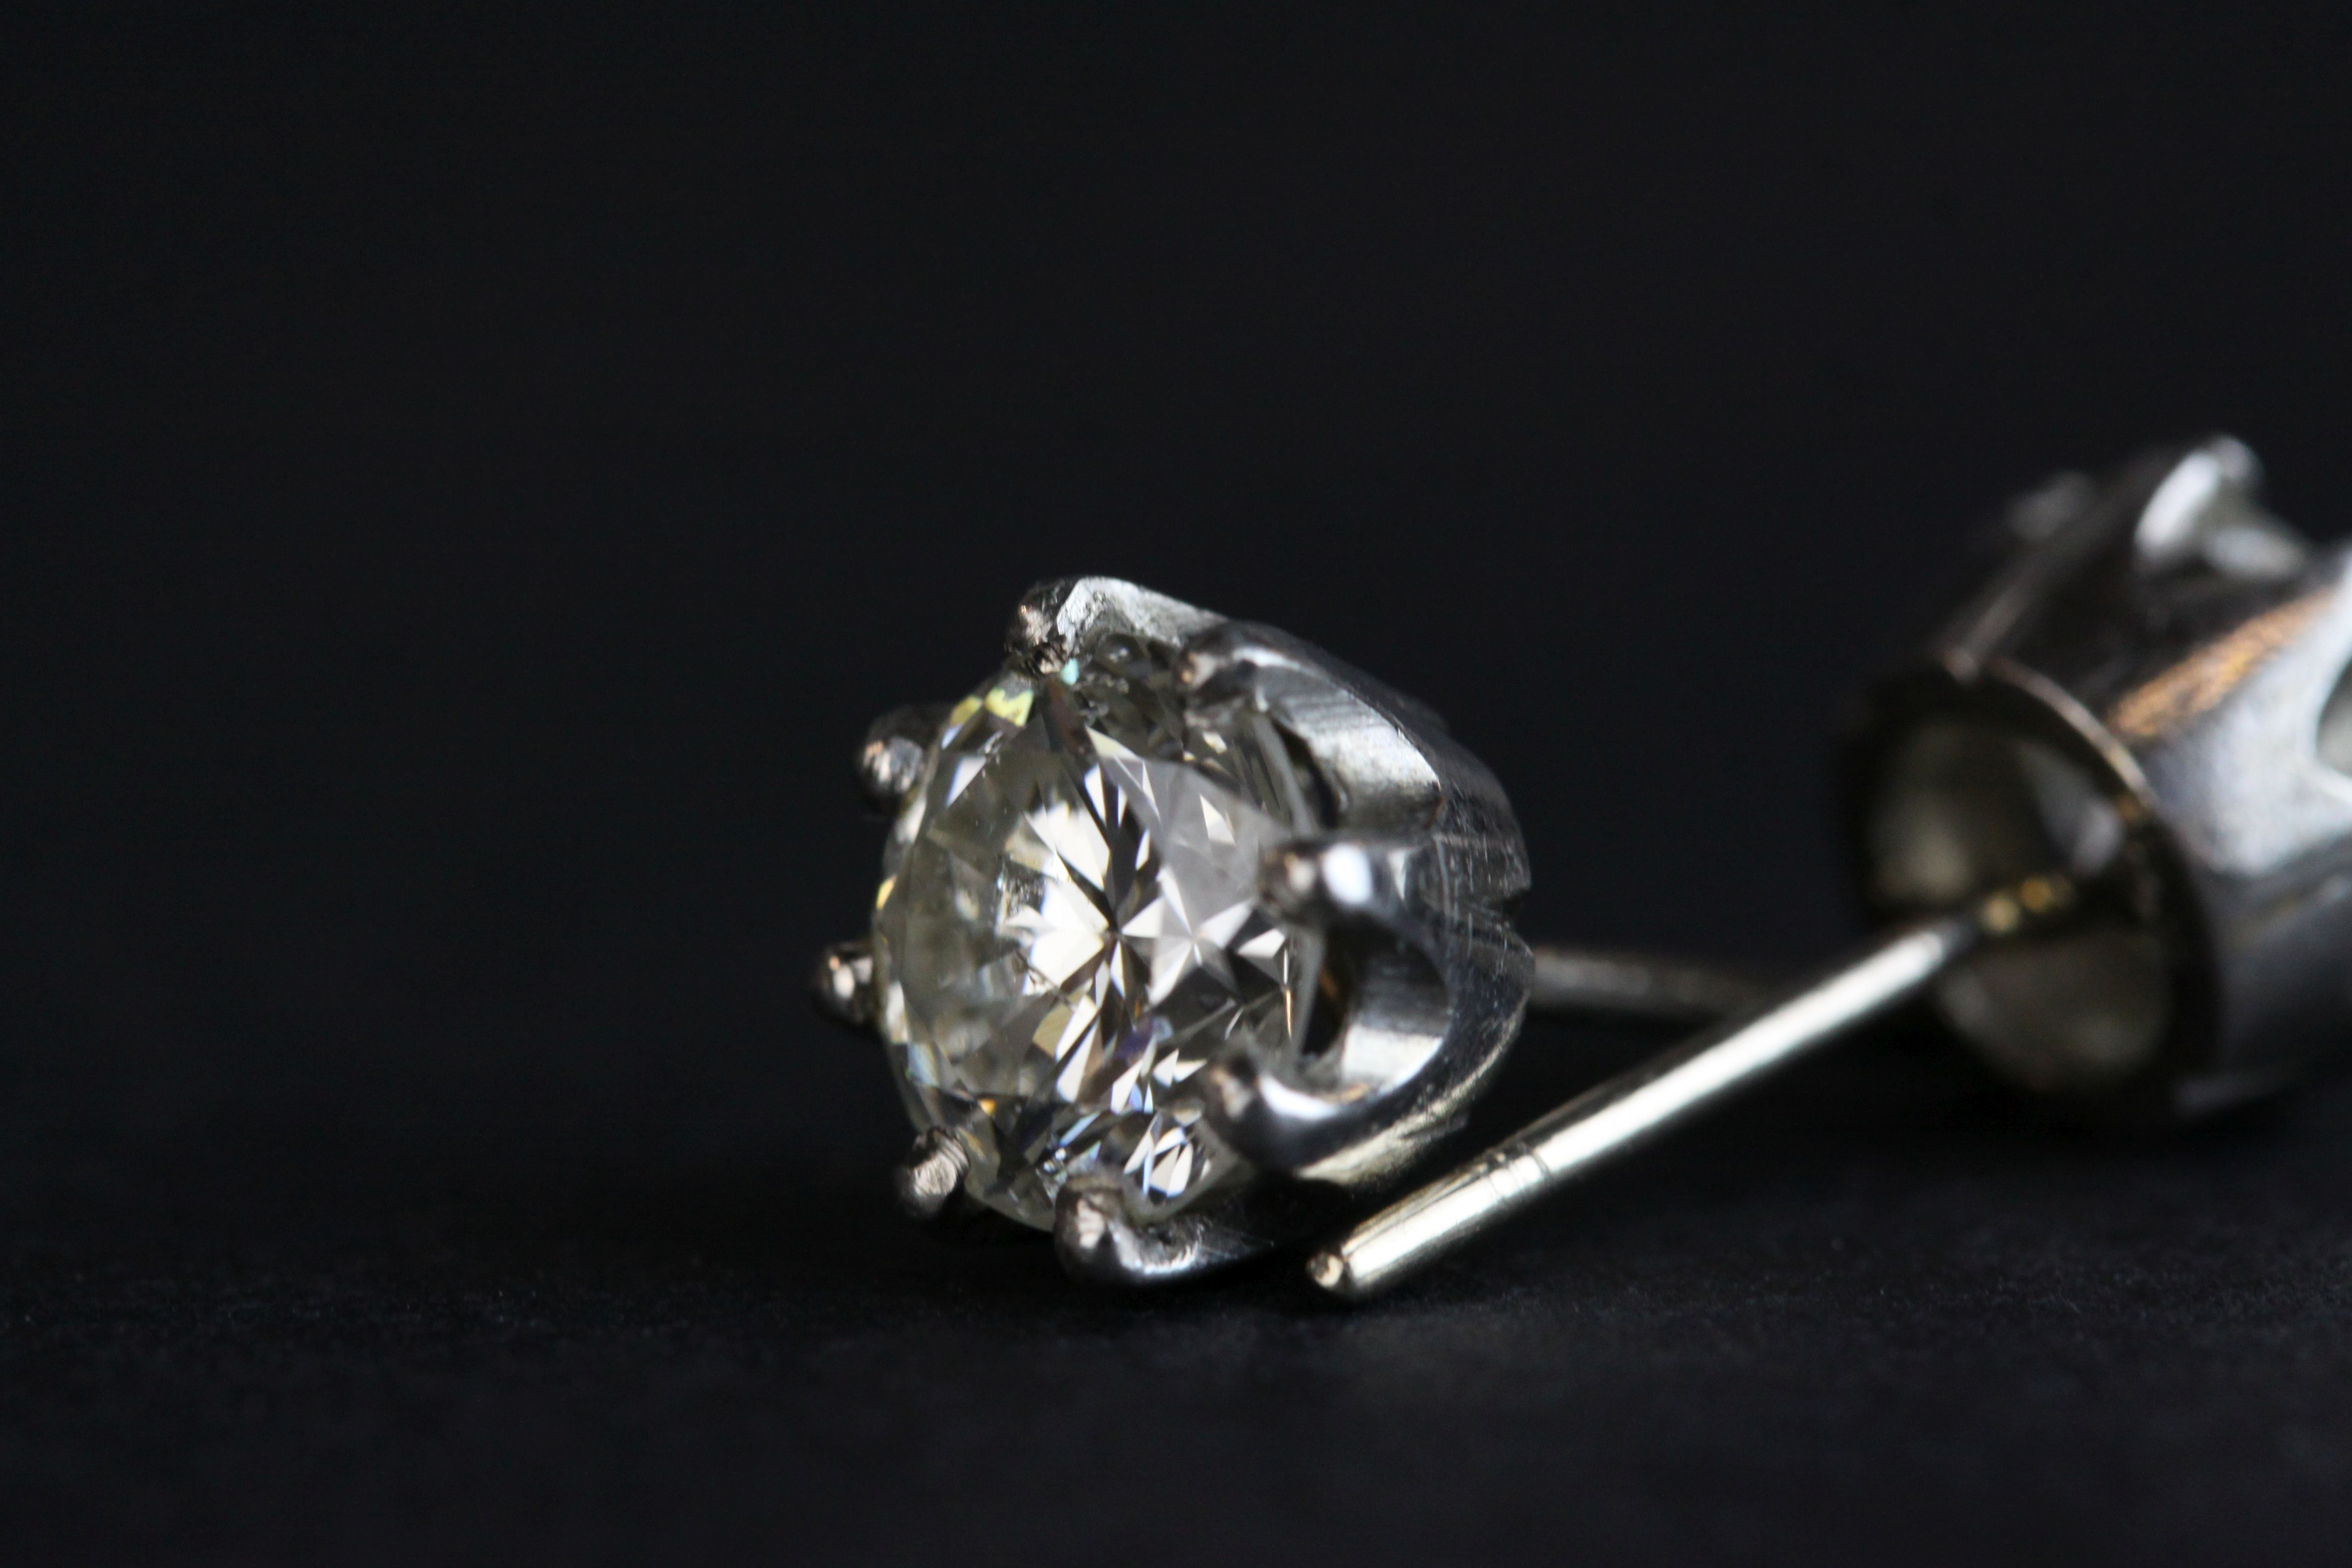 Pair of diamond solitaire stud earrings, each round brilliant cut diamond weighing approx 1.0 carat, - Image 7 of 8